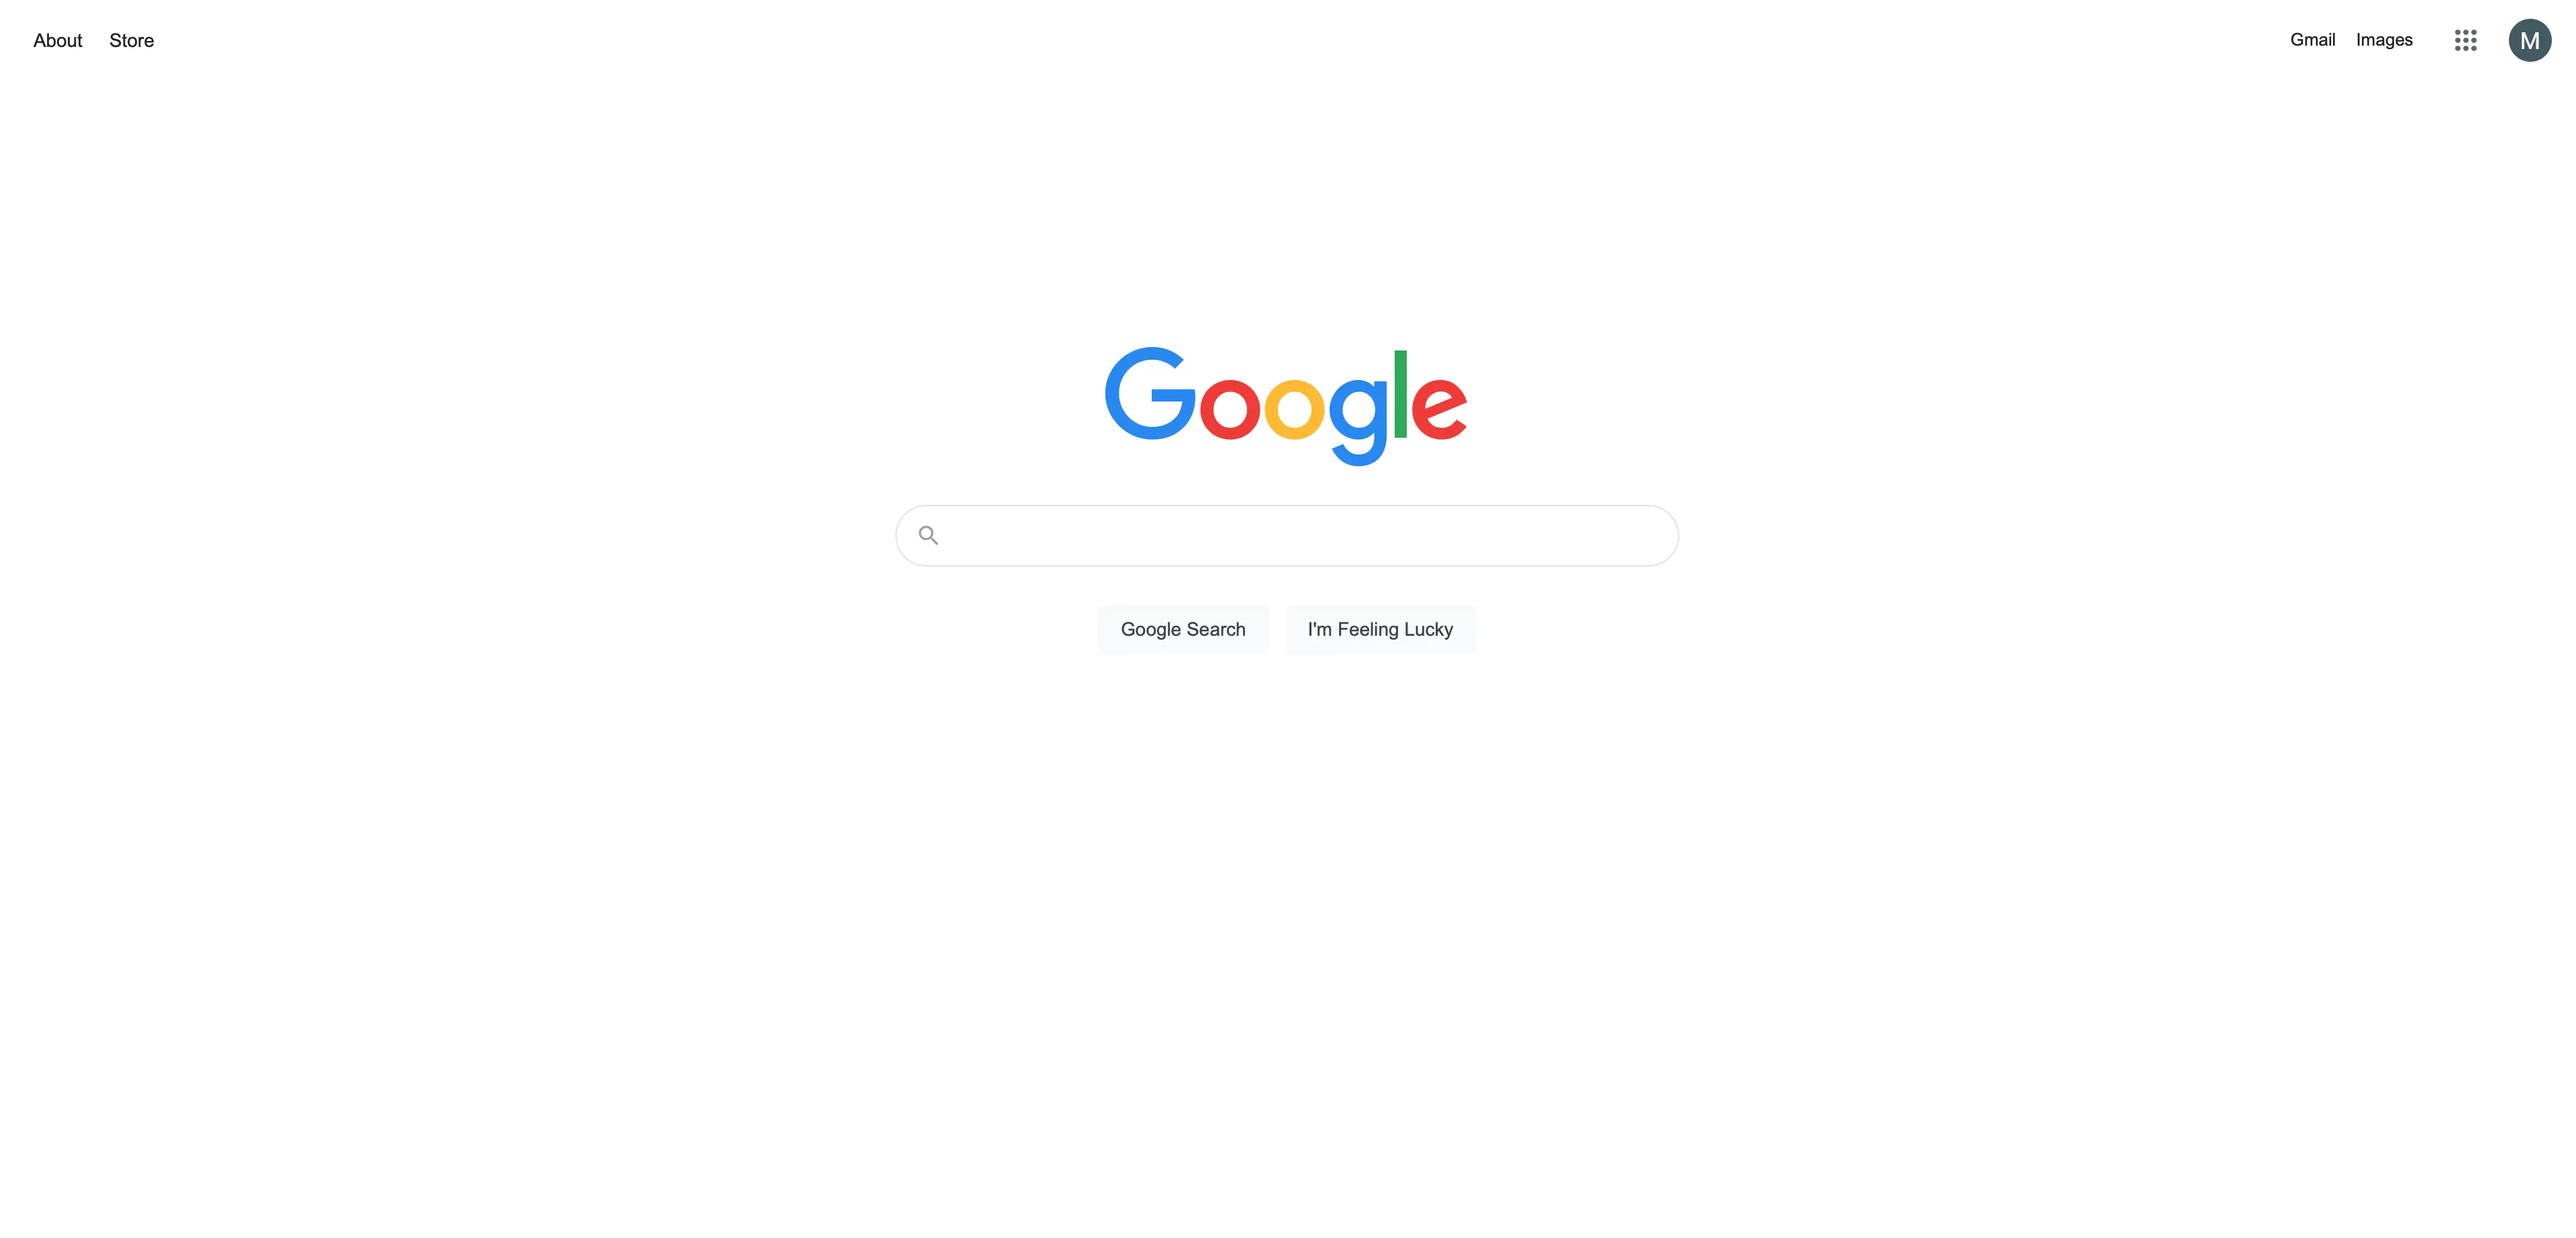  Screenshot of Google's minimalist search homepage with logo, search bar, and buttons.